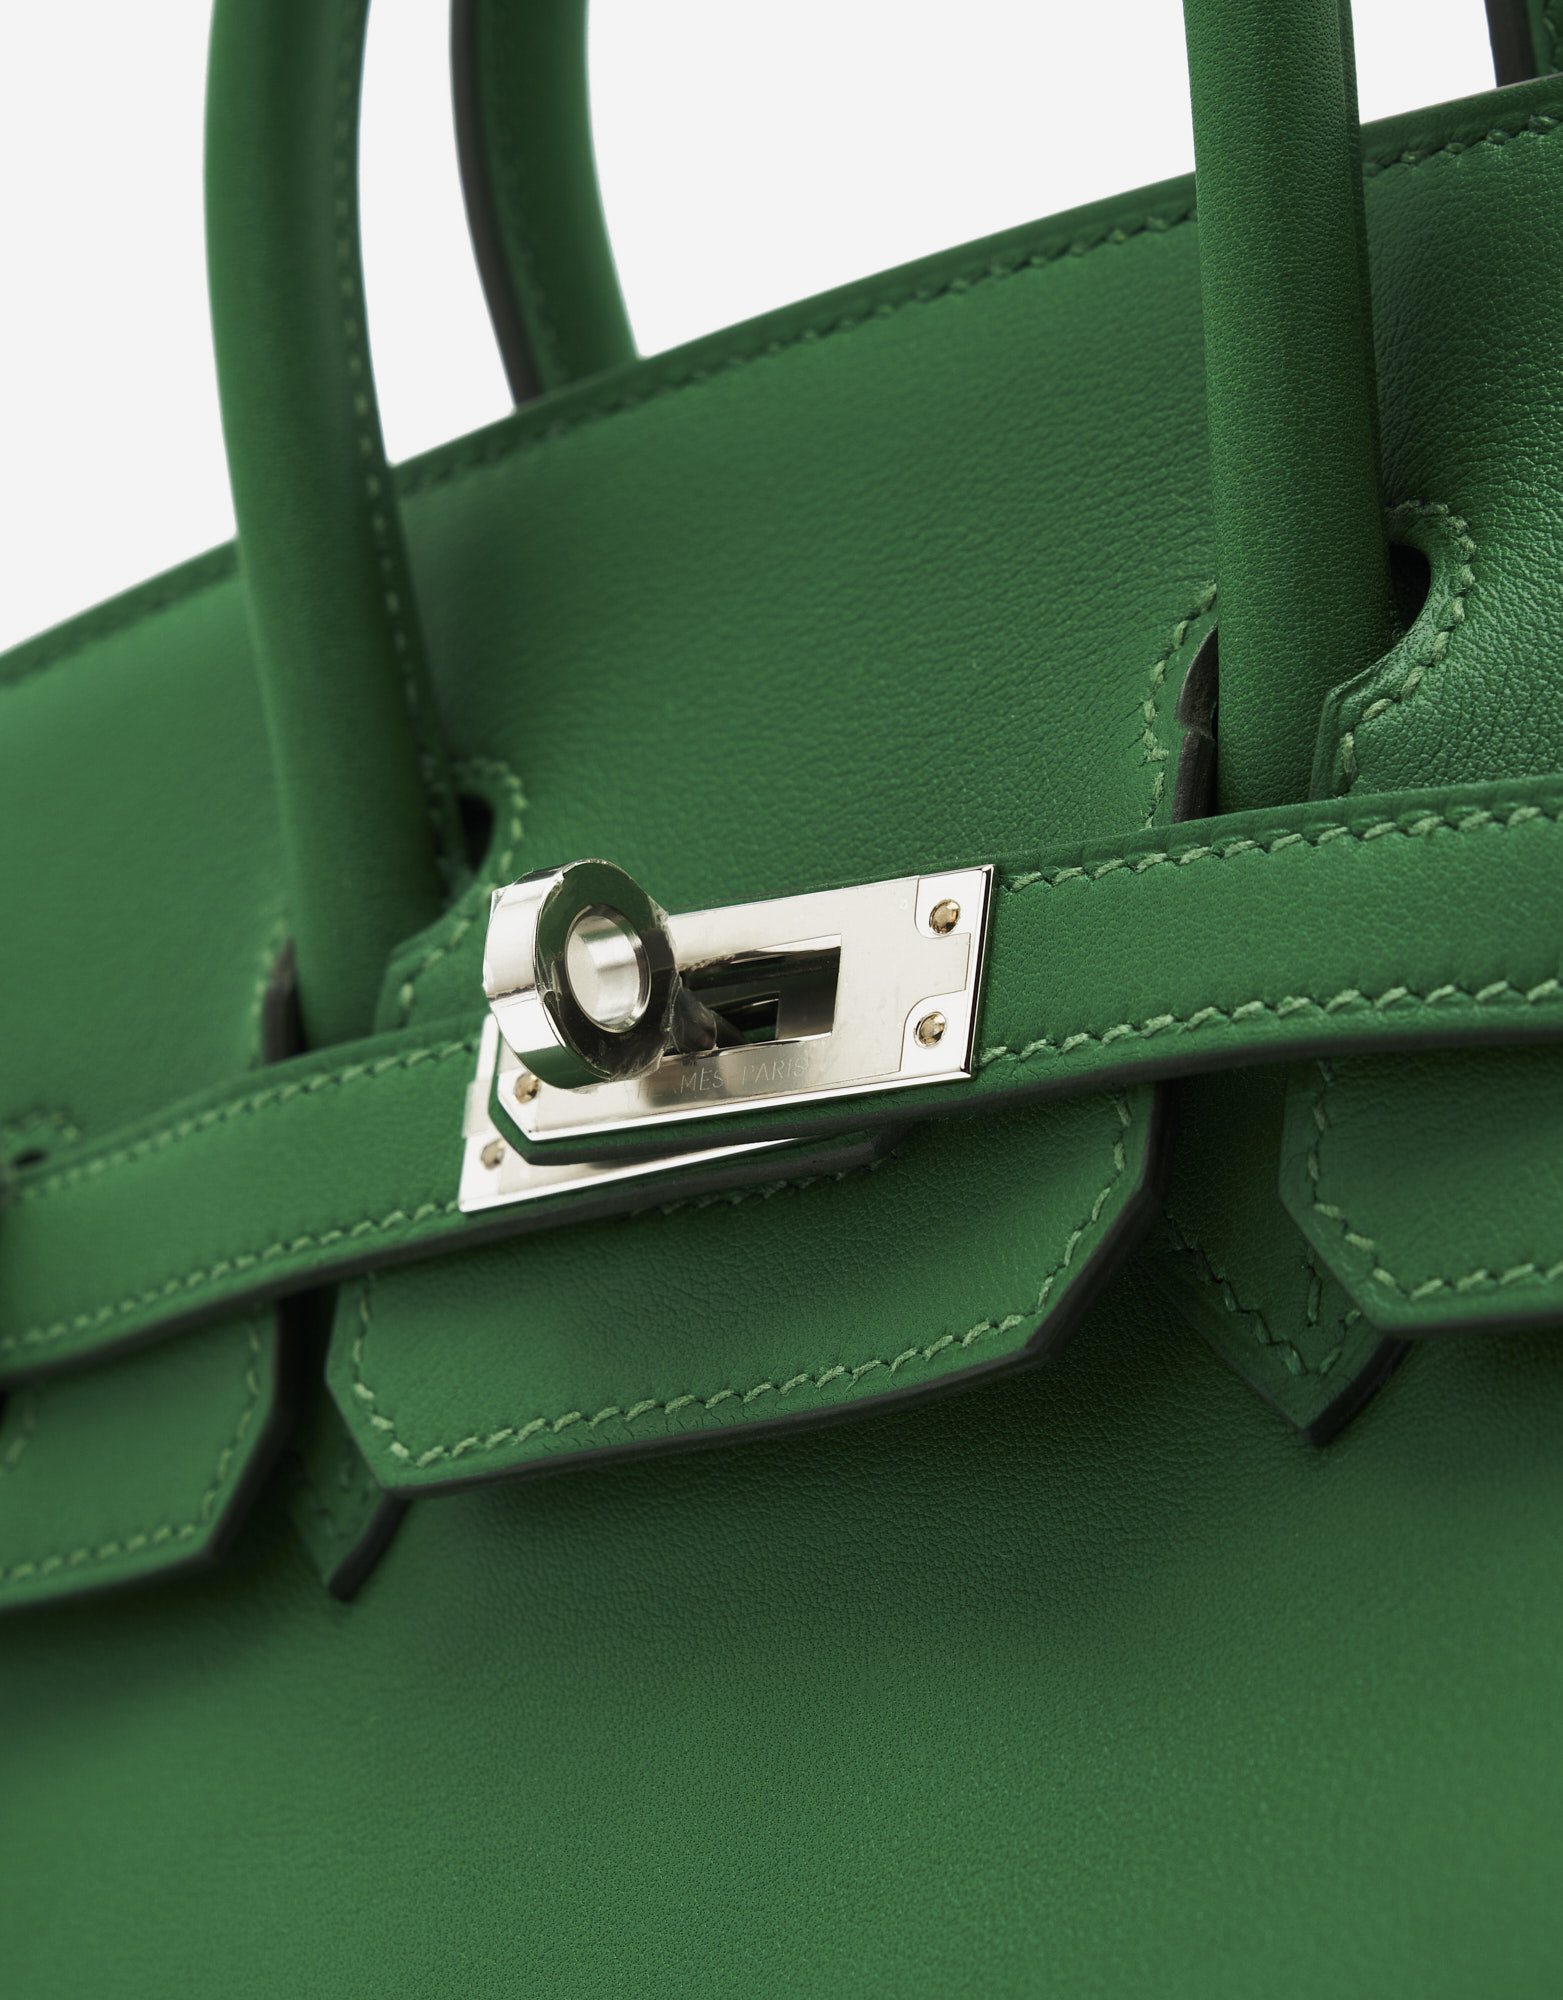 Hermes Birkin 25 Bag in Cactus Swift Leather with Gold Hardware – Mightychic